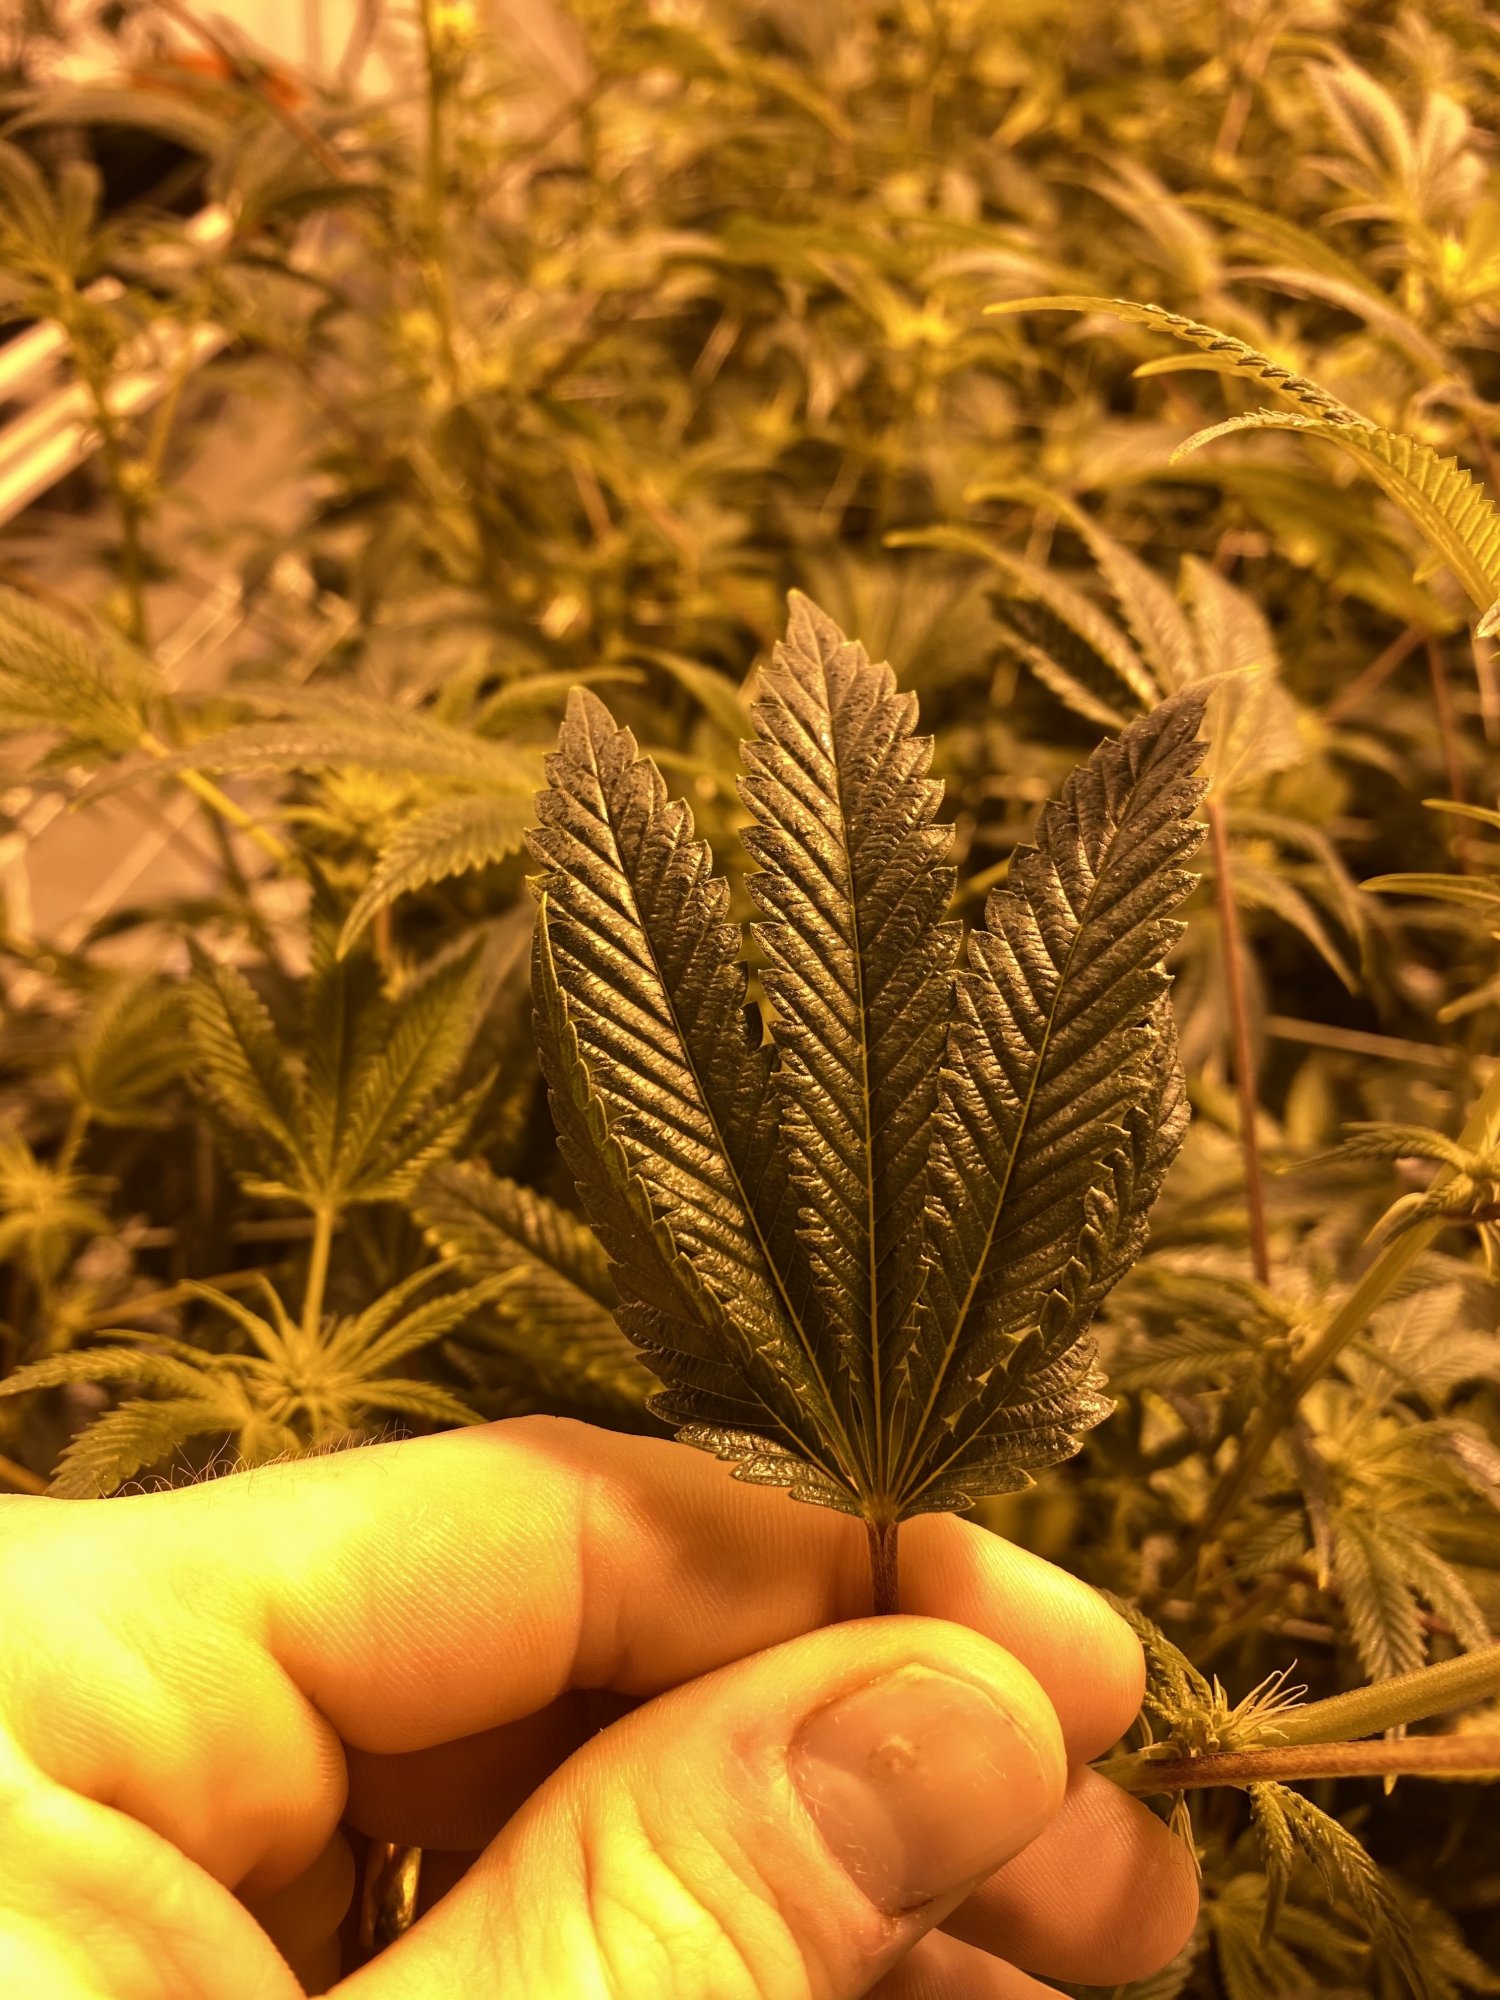 2 potential issues spider mites or just spiders  also rare leaf twist please help pics 2